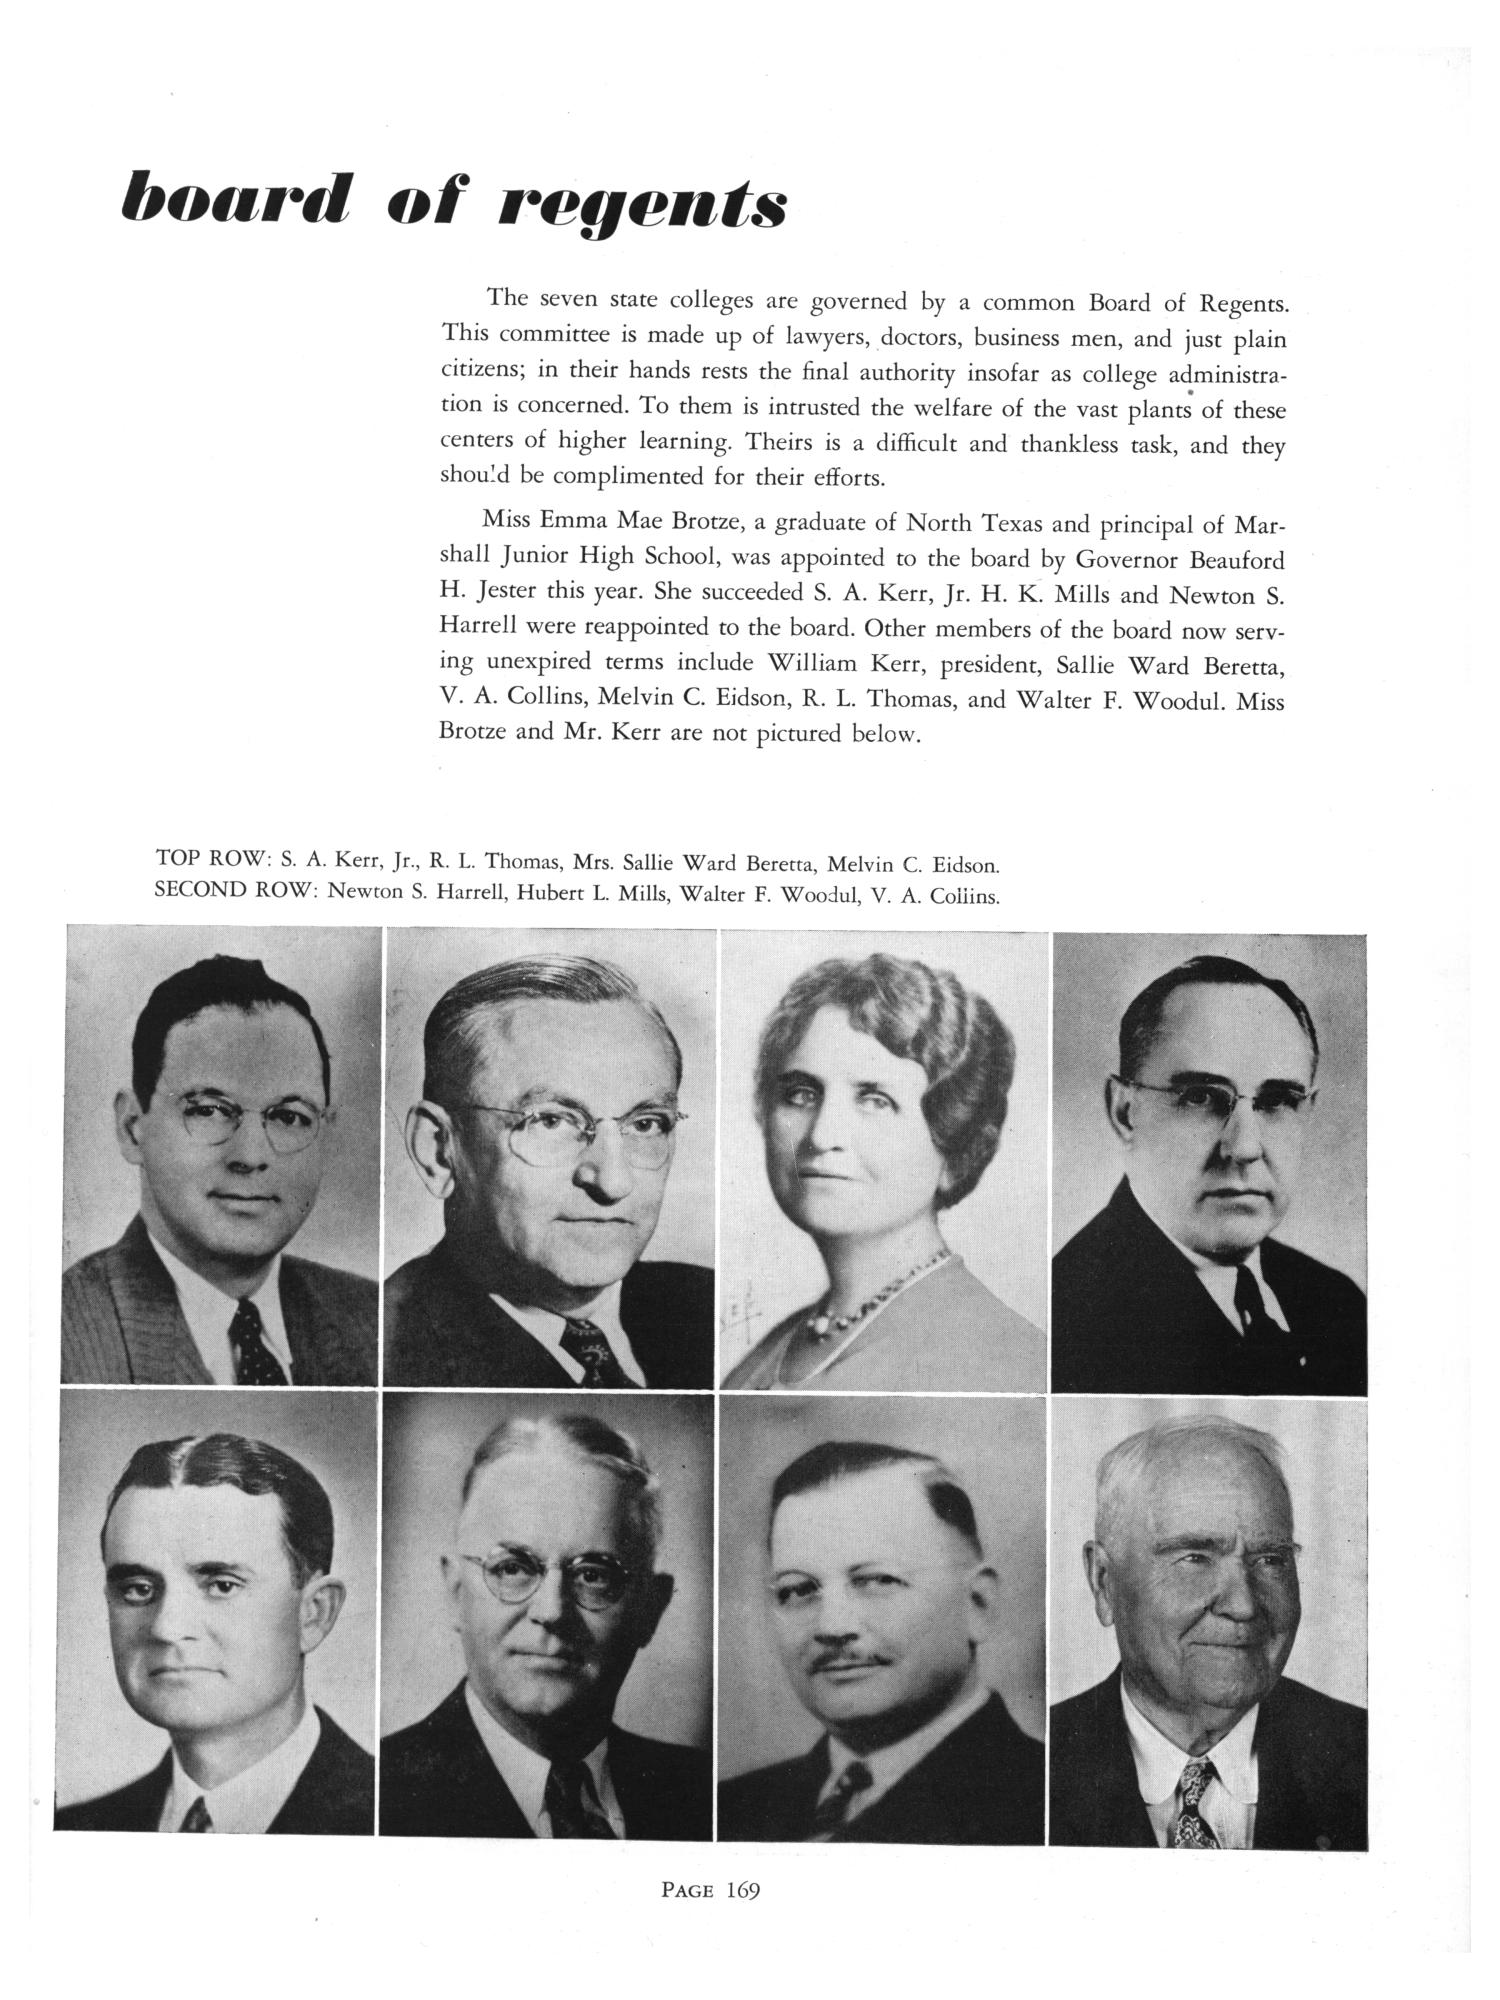 The Yucca, Yearbook of North Texas State College, 1949
                                                
                                                    169
                                                